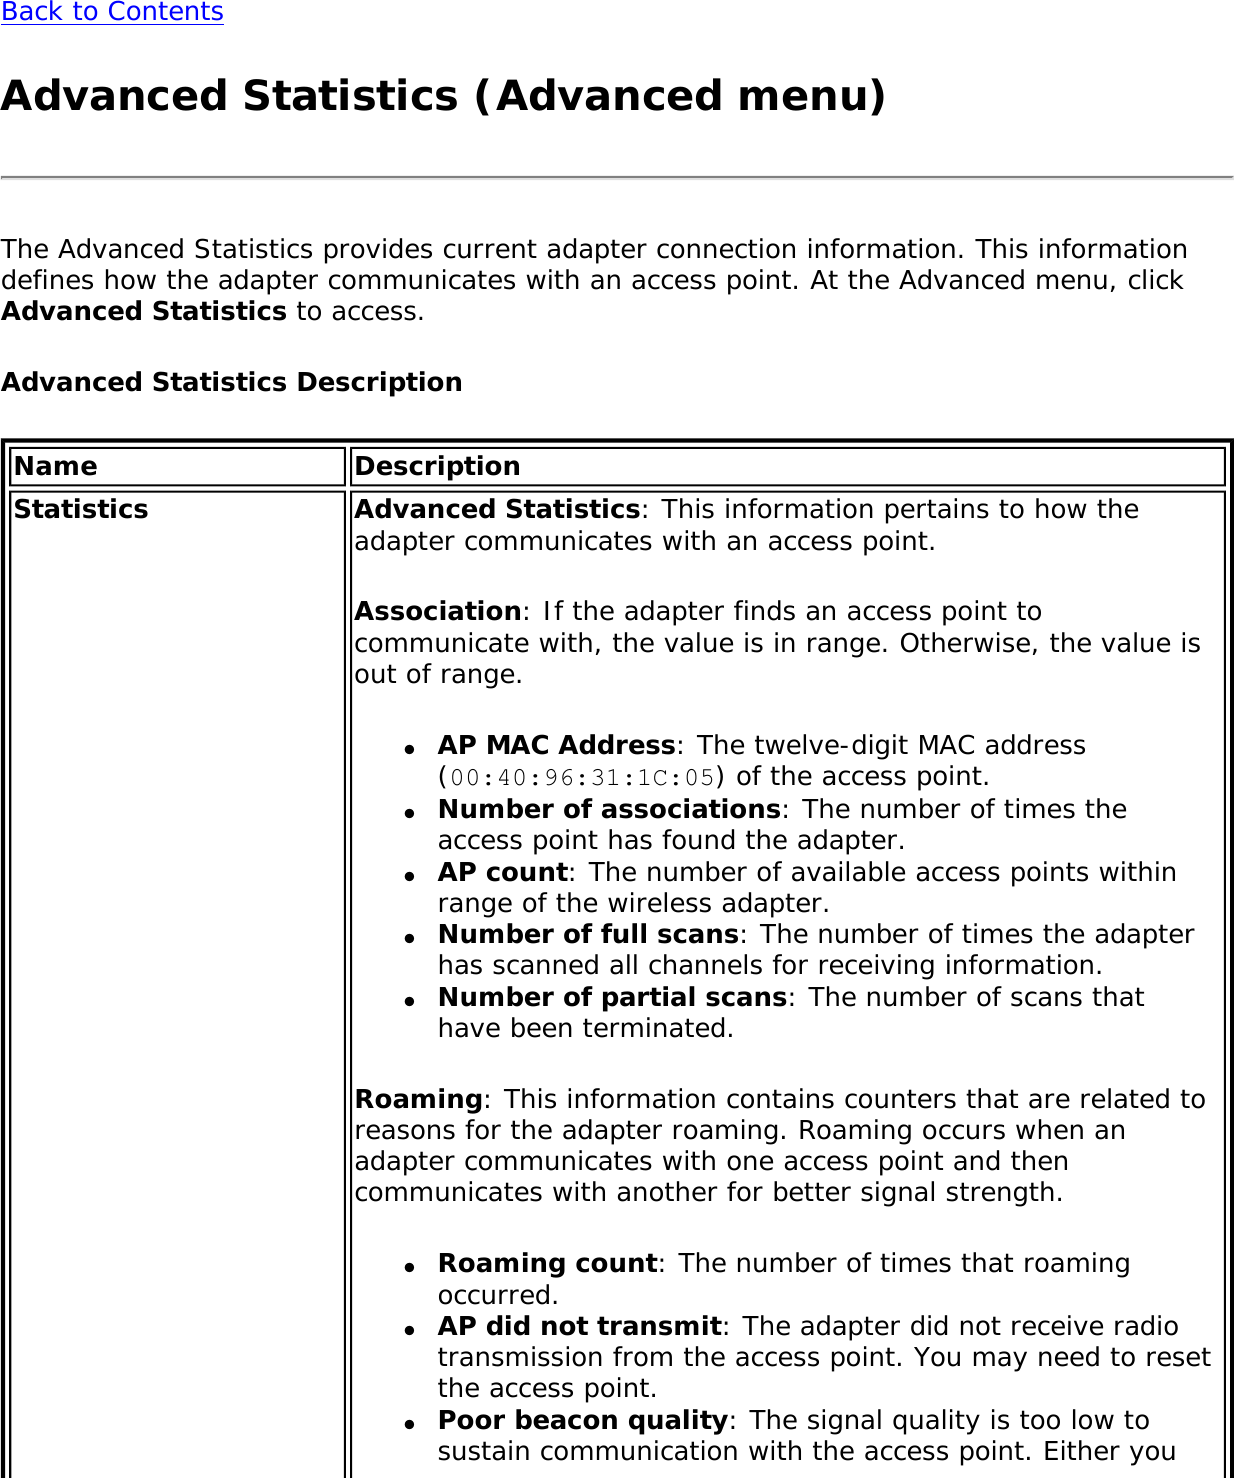 Back to ContentsAdvanced Statistics (Advanced menu)The Advanced Statistics provides current adapter connection information. This information defines how the adapter communicates with an access point. At the Advanced menu, click Advanced Statistics to access. Advanced Statistics DescriptionName DescriptionStatistics Advanced Statistics: This information pertains to how the adapter communicates with an access point.Association: If the adapter finds an access point to communicate with, the value is in range. Otherwise, the value is out of range.●     AP MAC Address: The twelve-digit MAC address (00:40:96:31:1C:05) of the access point.●     Number of associations: The number of times the access point has found the adapter.●     AP count: The number of available access points within range of the wireless adapter.●     Number of full scans: The number of times the adapter has scanned all channels for receiving information.●     Number of partial scans: The number of scans that have been terminated.Roaming: This information contains counters that are related to reasons for the adapter roaming. Roaming occurs when an adapter communicates with one access point and then communicates with another for better signal strength.●     Roaming count: The number of times that roaming occurred.●     AP did not transmit: The adapter did not receive radio transmission from the access point. You may need to reset the access point.●     Poor beacon quality: The signal quality is too low to sustain communication with the access point. Either you 